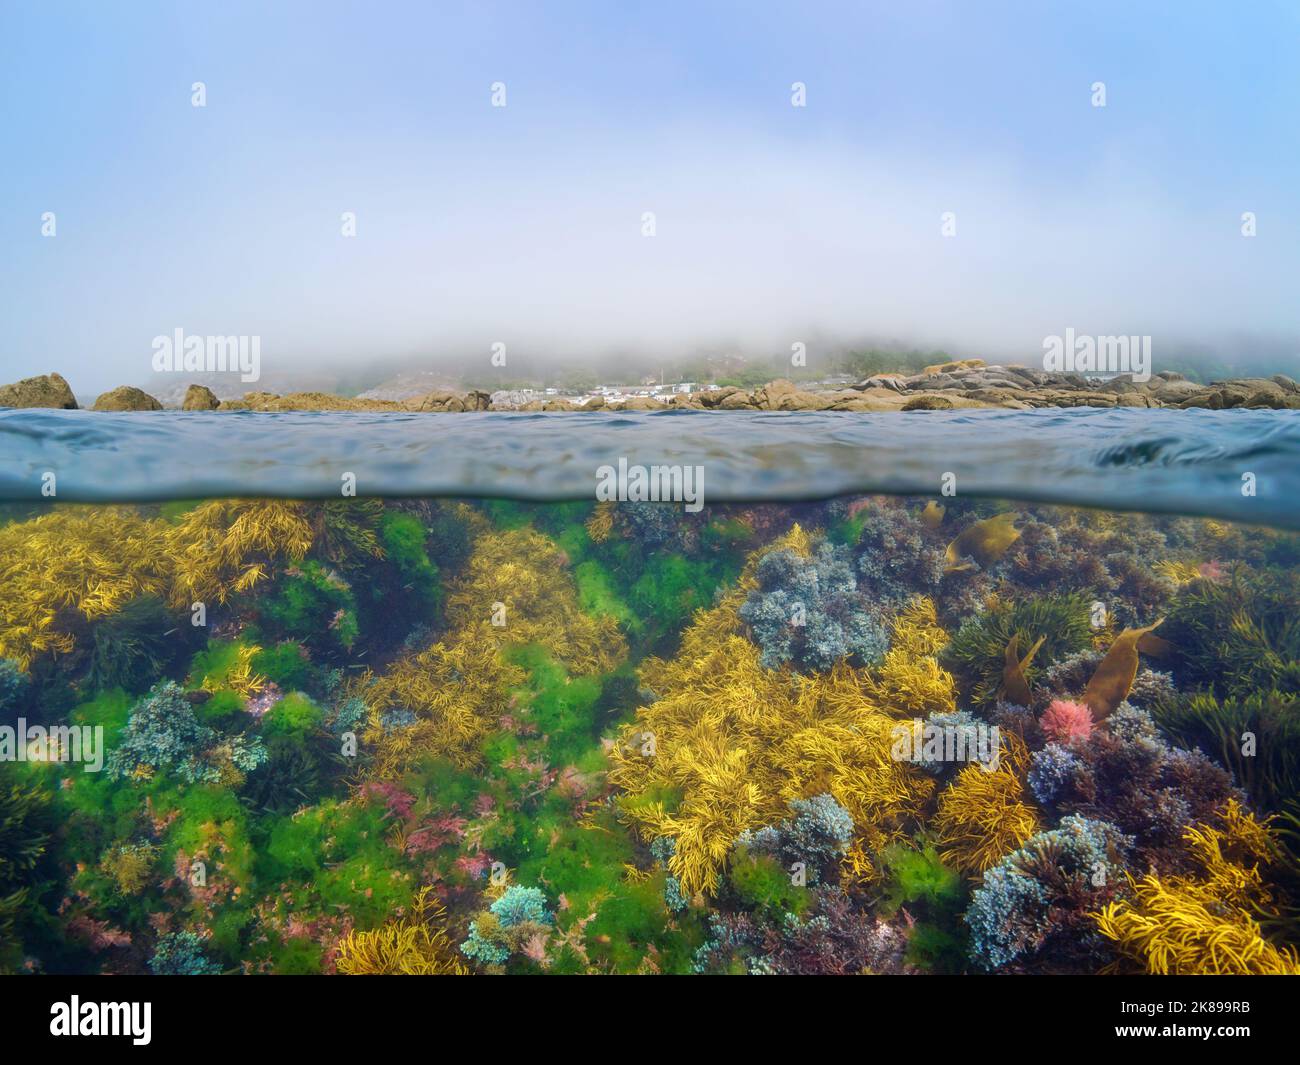 Fog on the Atlantic coast with algae underwater in the ocean, split level view over and under water surface, Spain, Galicia, Rias baixas Stock Photo